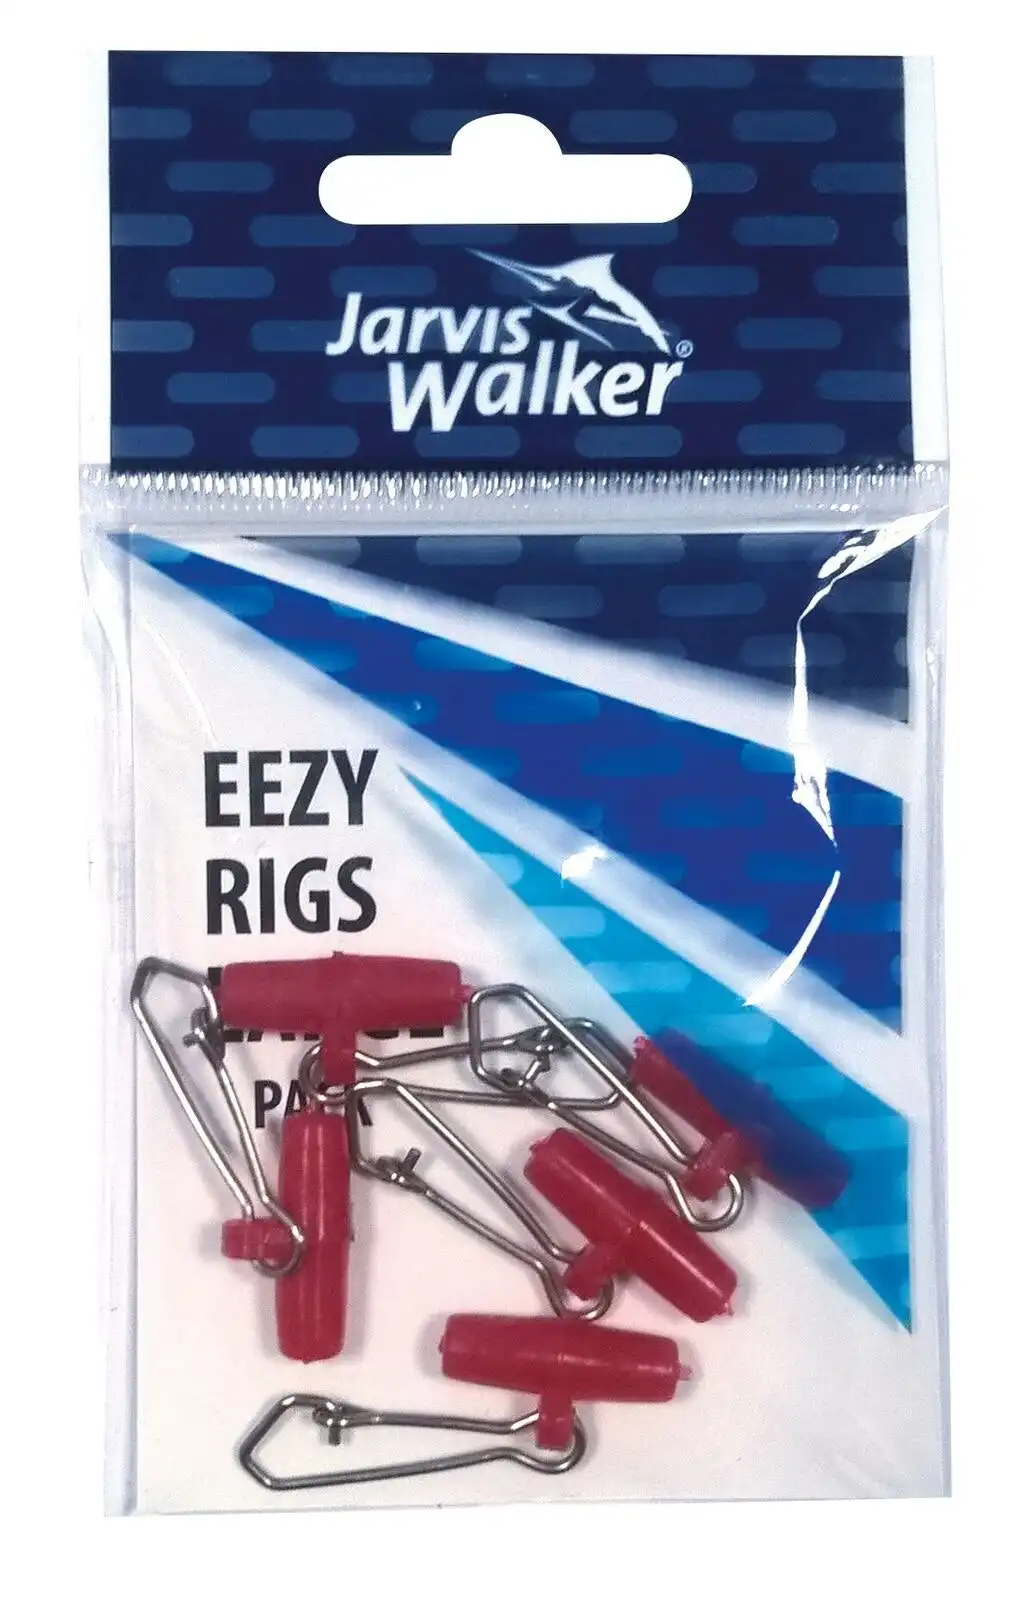 5 Pack of Small Jarvis Walker Eezy Sinker Rigs-Swiftly Changes Your Fishing Rigs